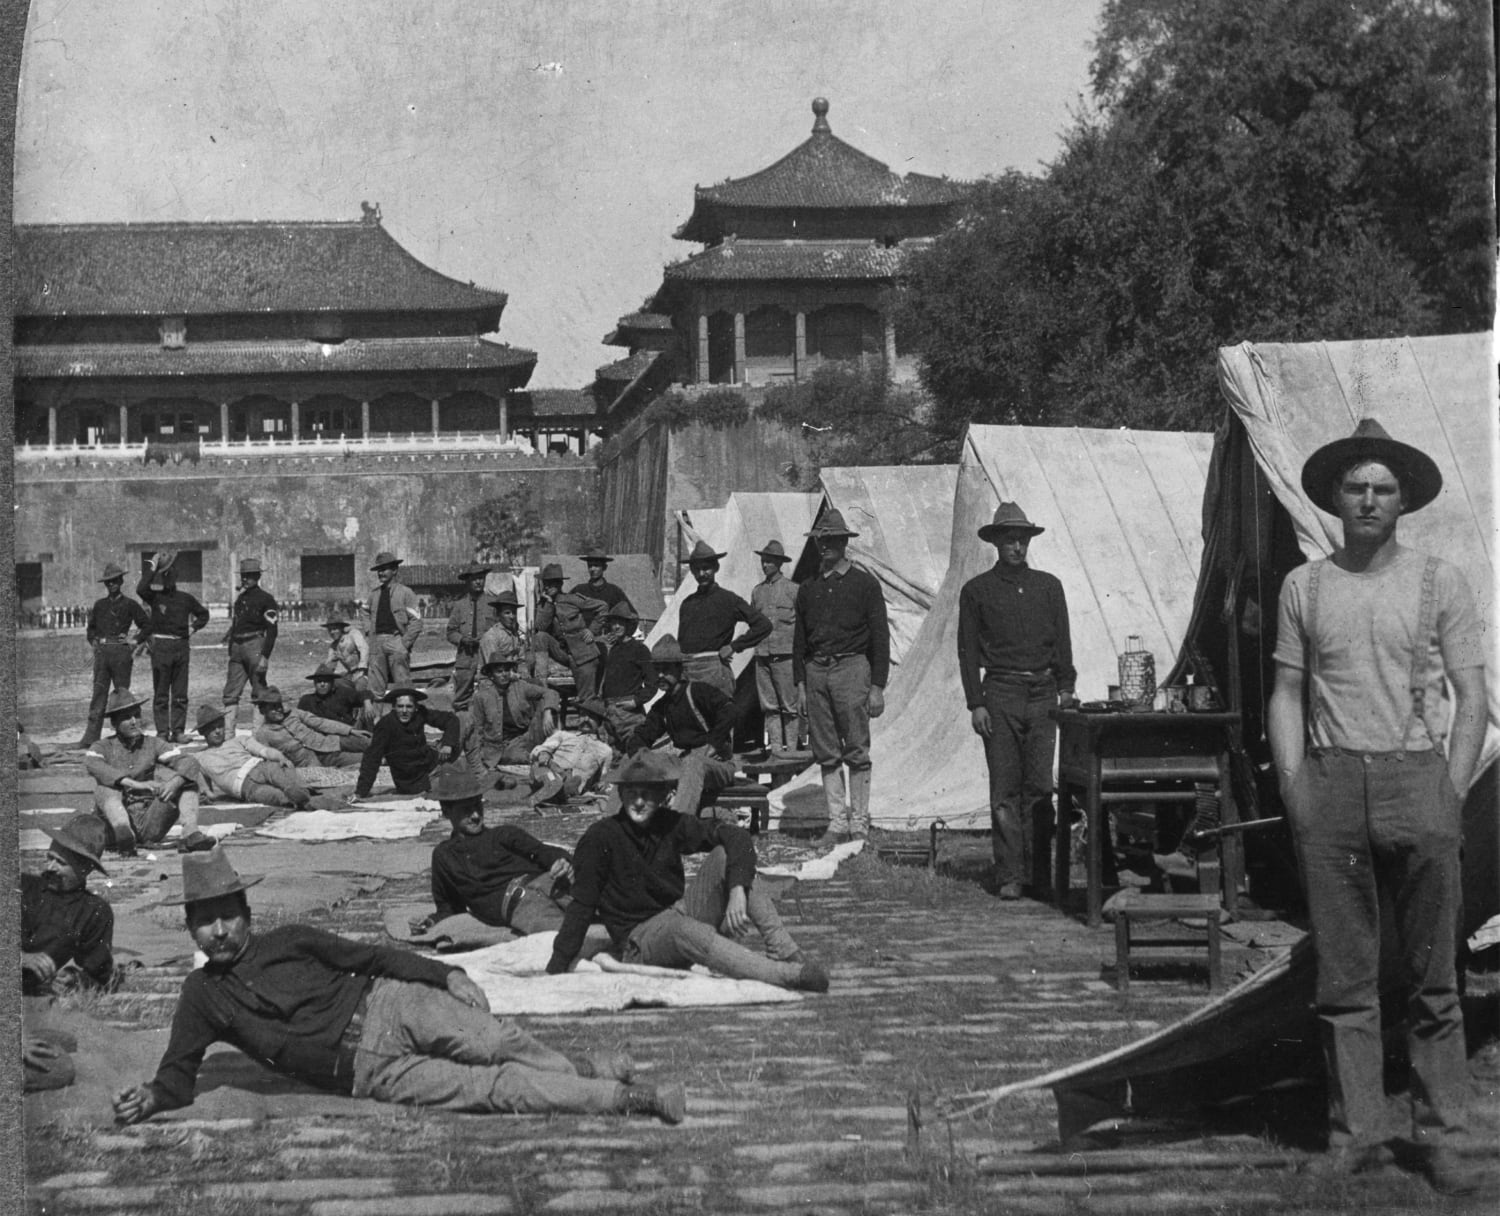 American soldiers camp inside the Forbidden City during the occupation of Beijing, Imperial China, 1900